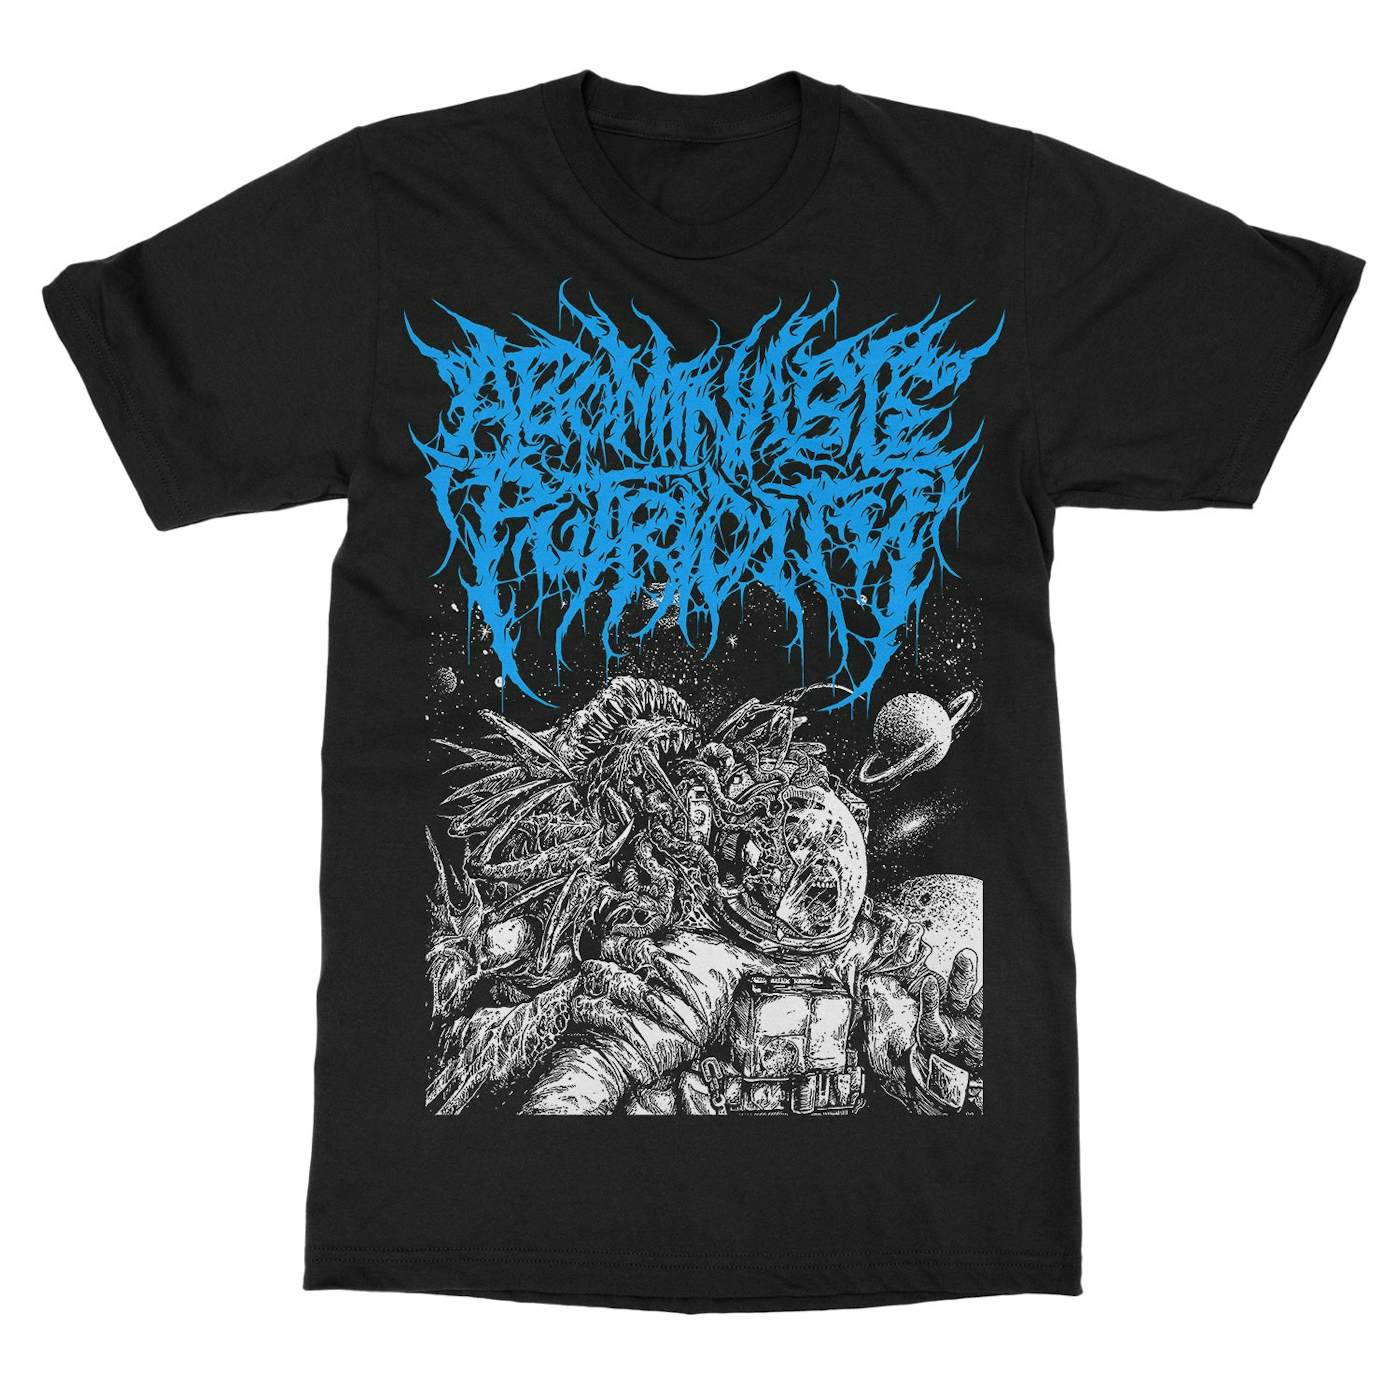 Abominable Putridity "The Last Astronaut Blue Logo" T-Shirt